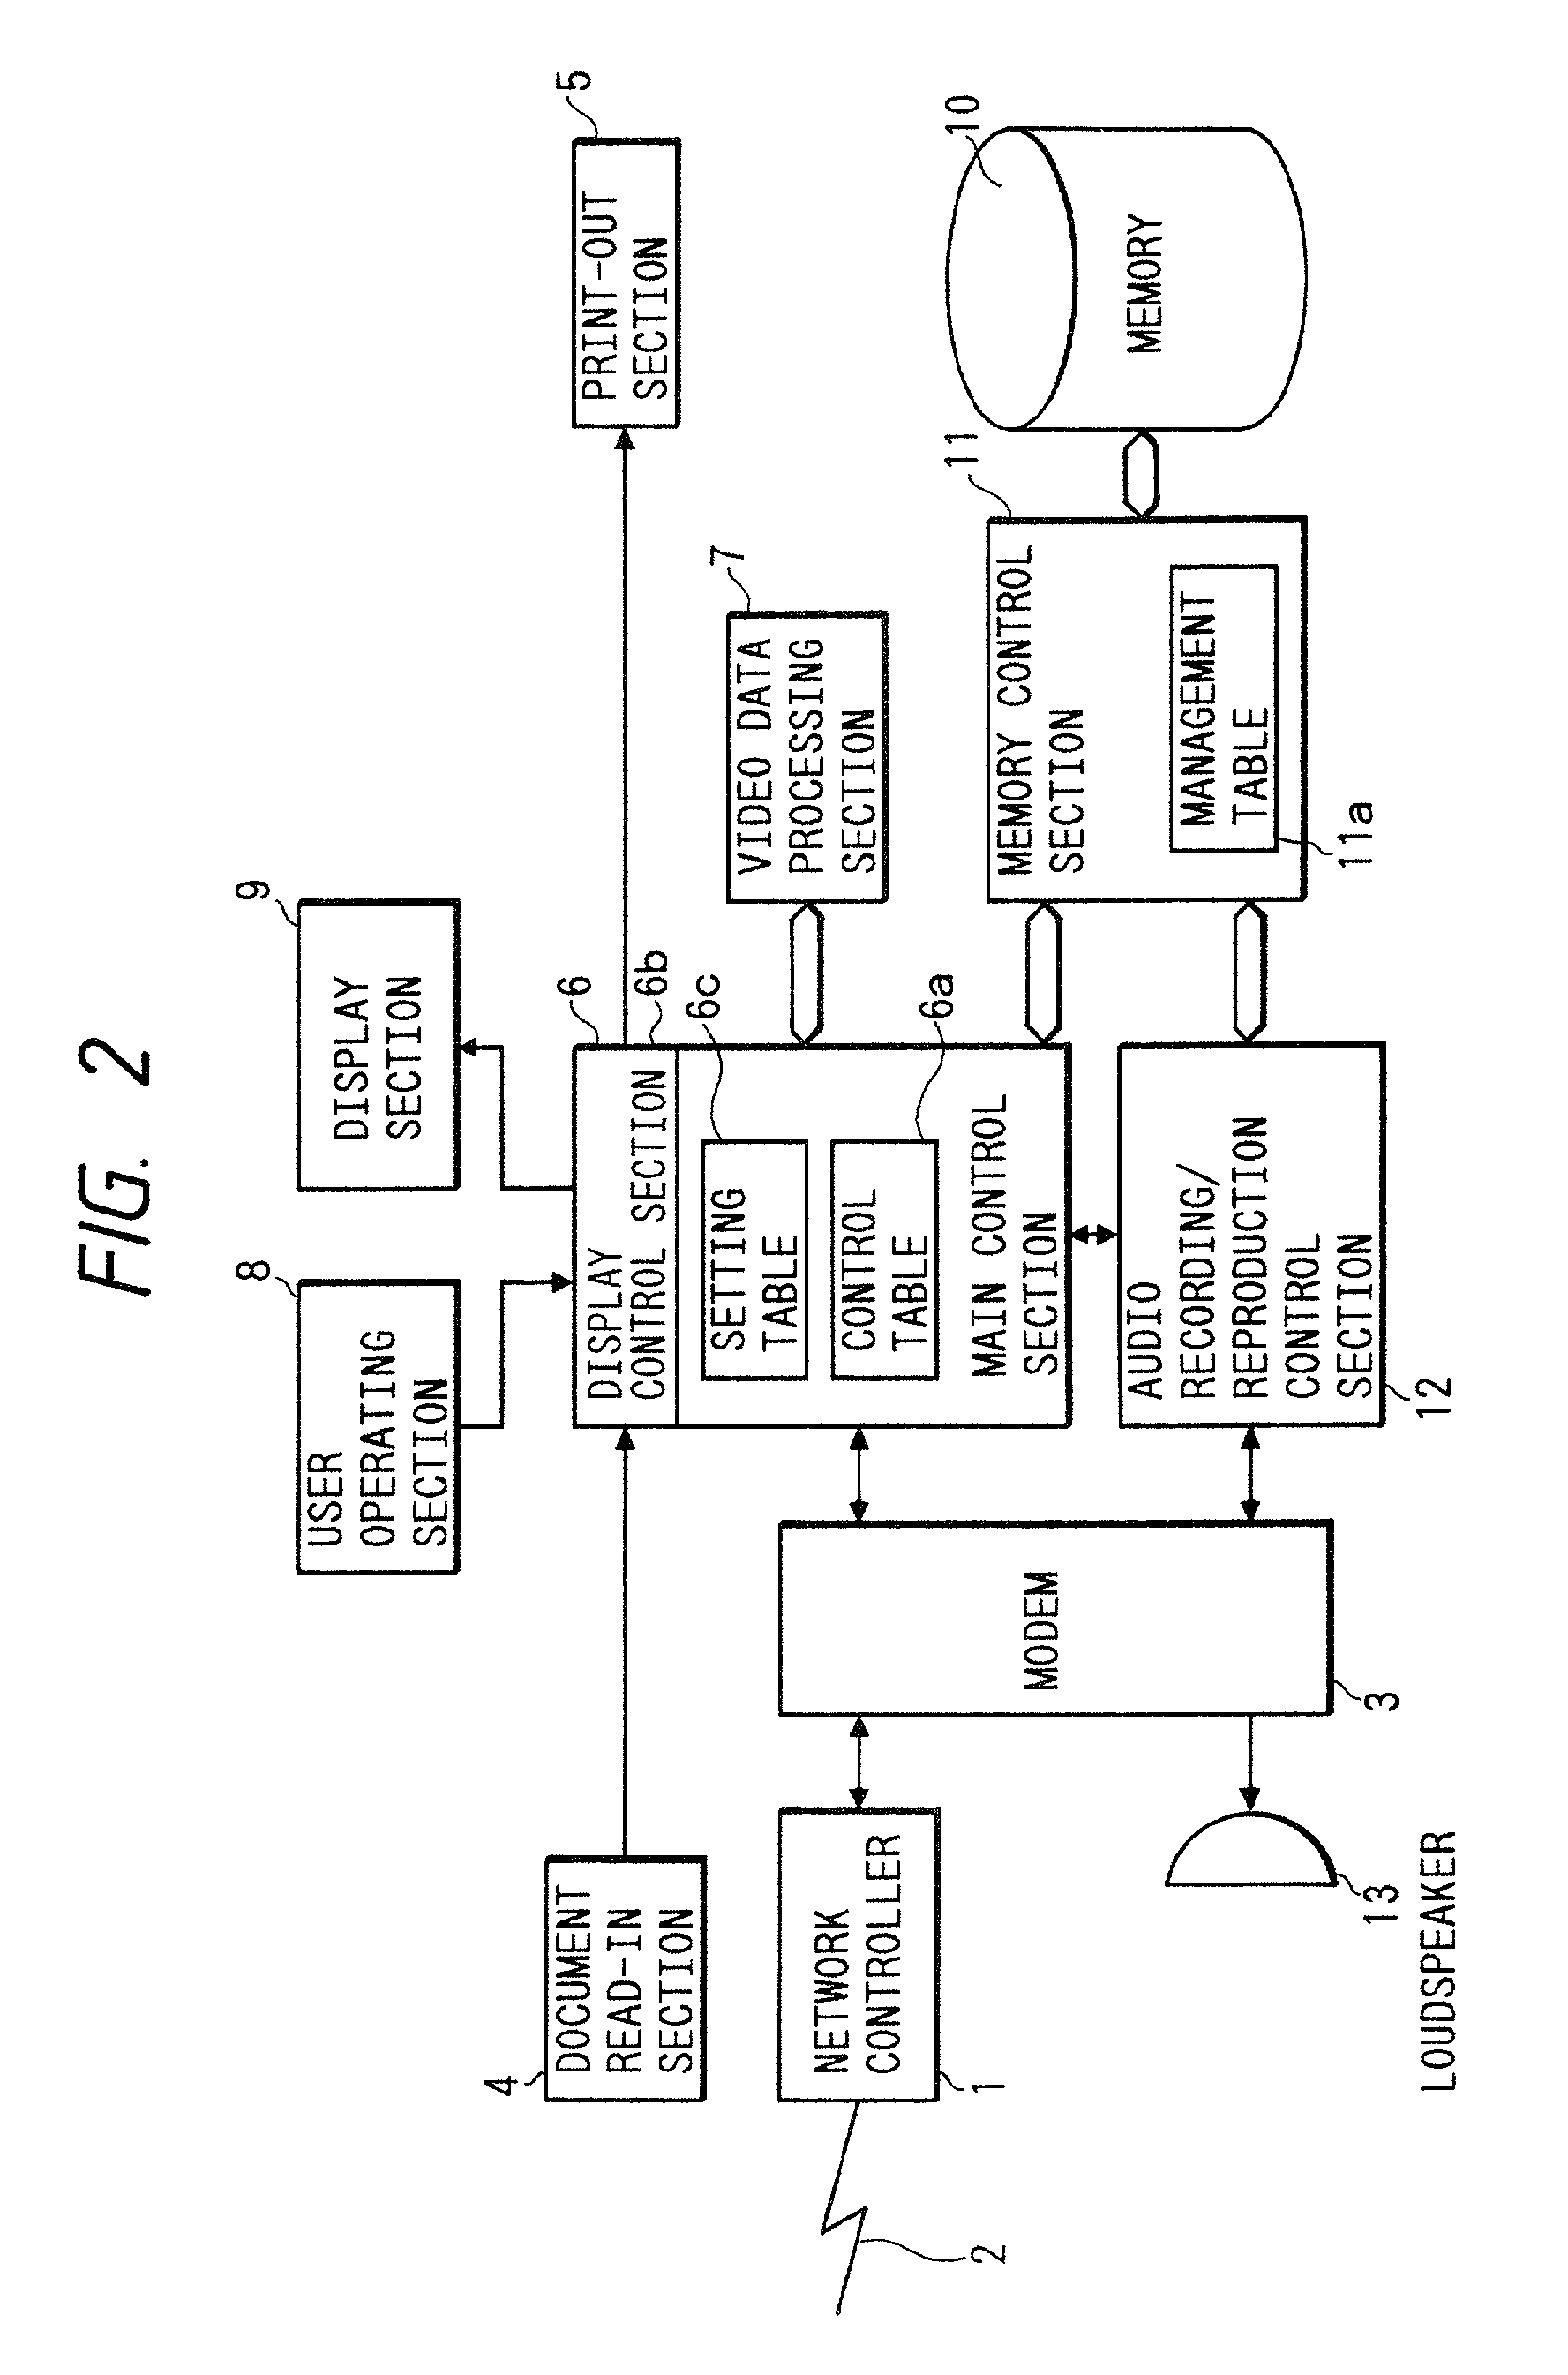 Data communication apparatus having common memory for storing video and audio data